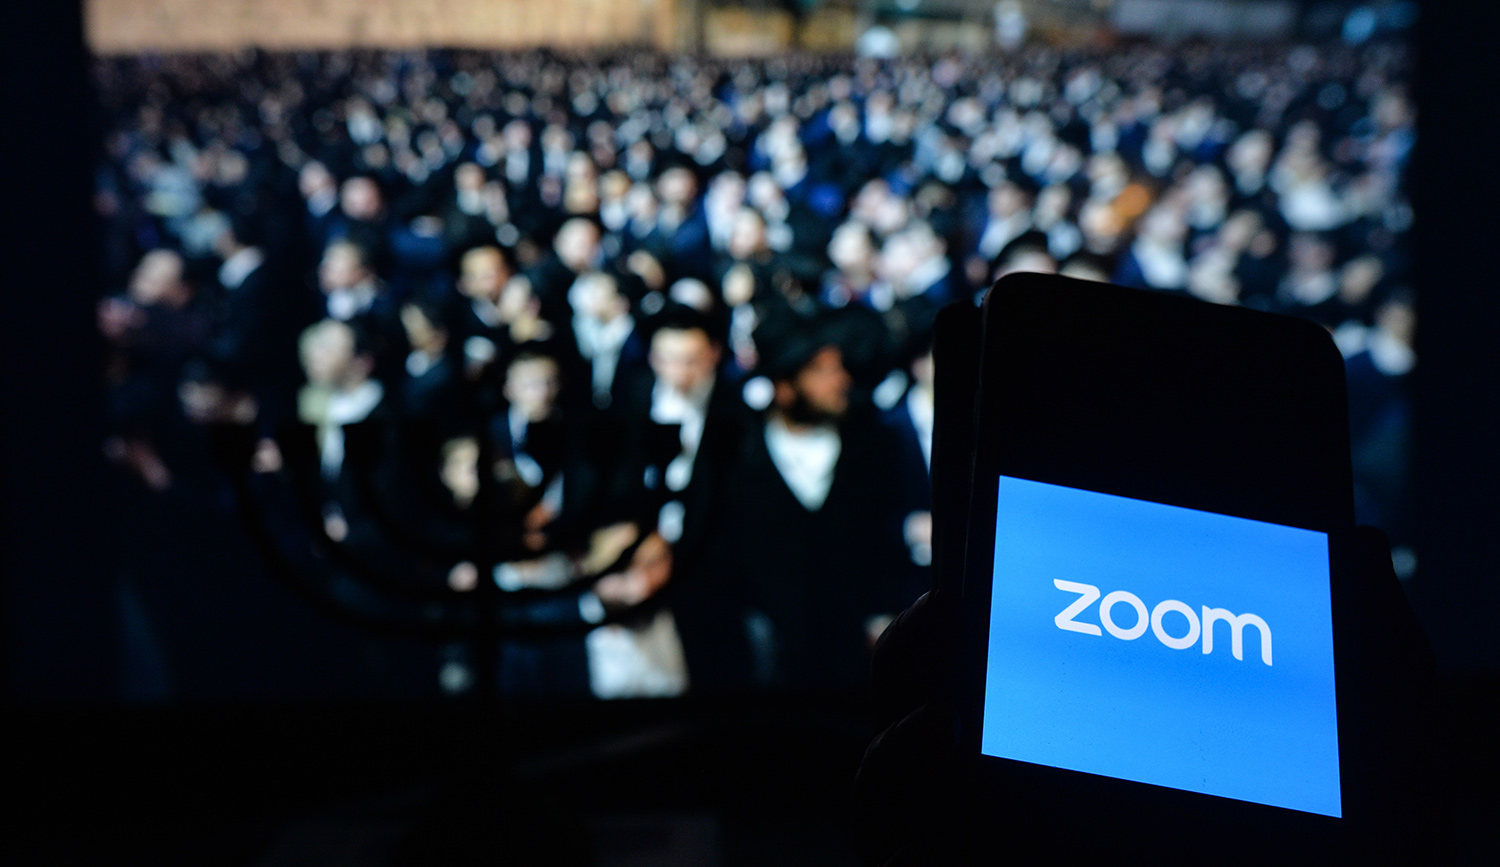 In Rejecting the Zoom Seder, What Did Orthodox Jews Affirm?